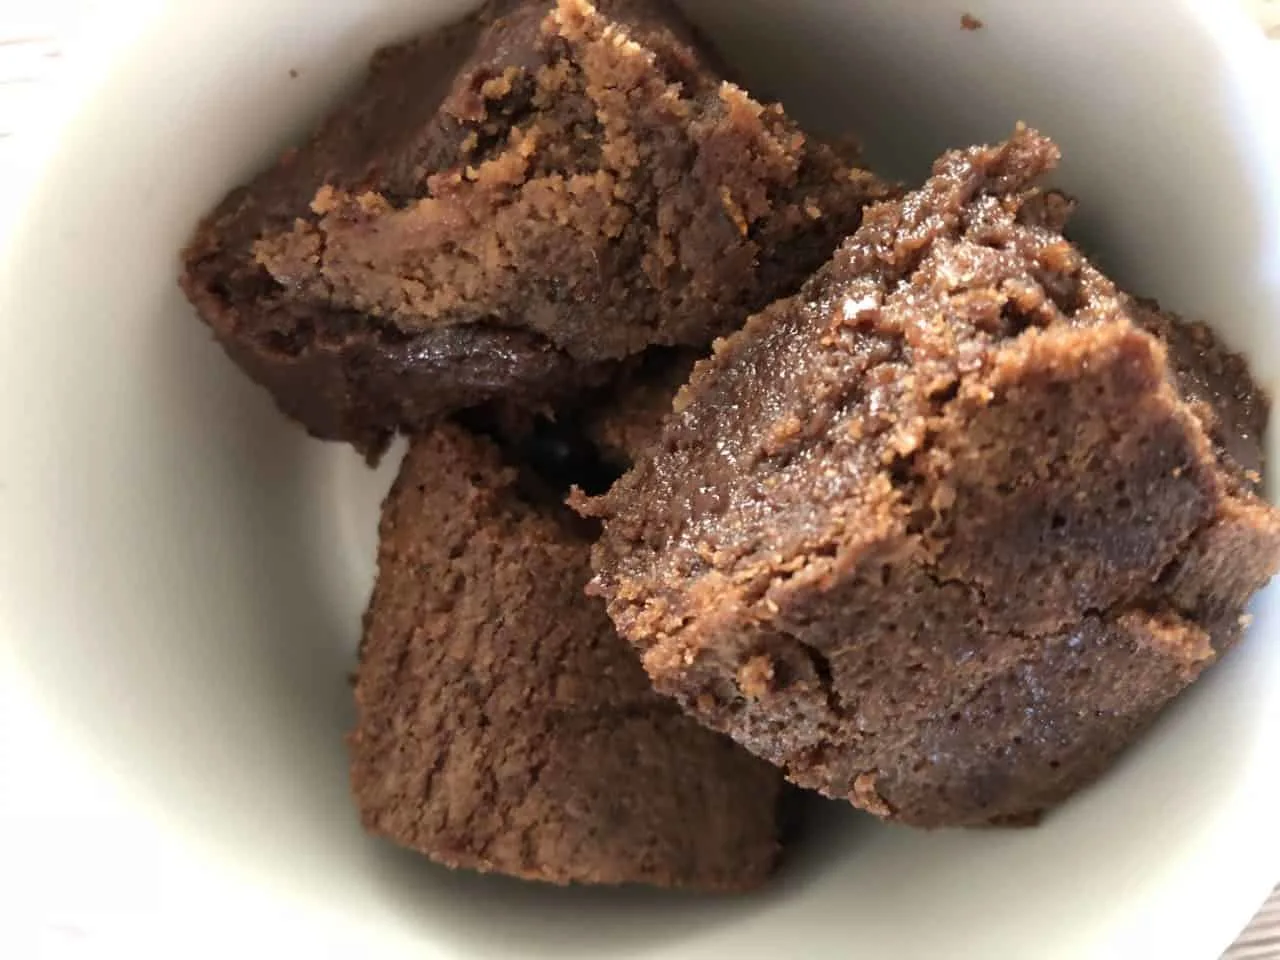 Chilli Chocolate Brownies in the AirFryer